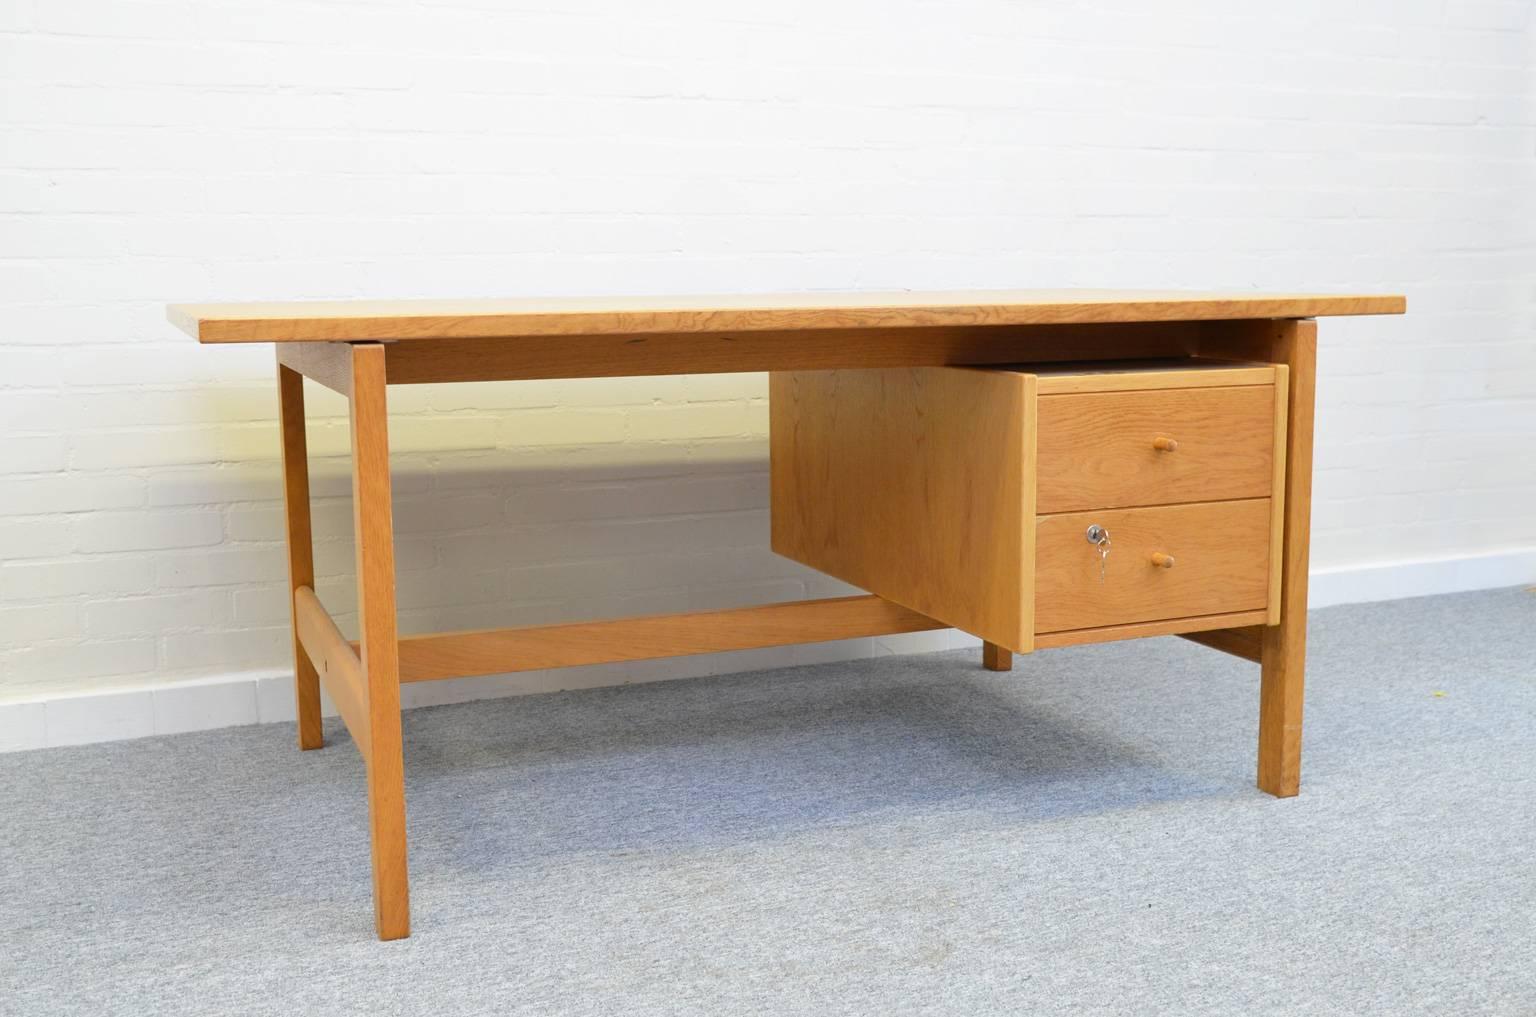 Straight forward design by Hans Wagner, made in solid oak. Originally designed for a Danish school, later on also sold for private use. It is worth mentioning that the desk can be used on both sides.